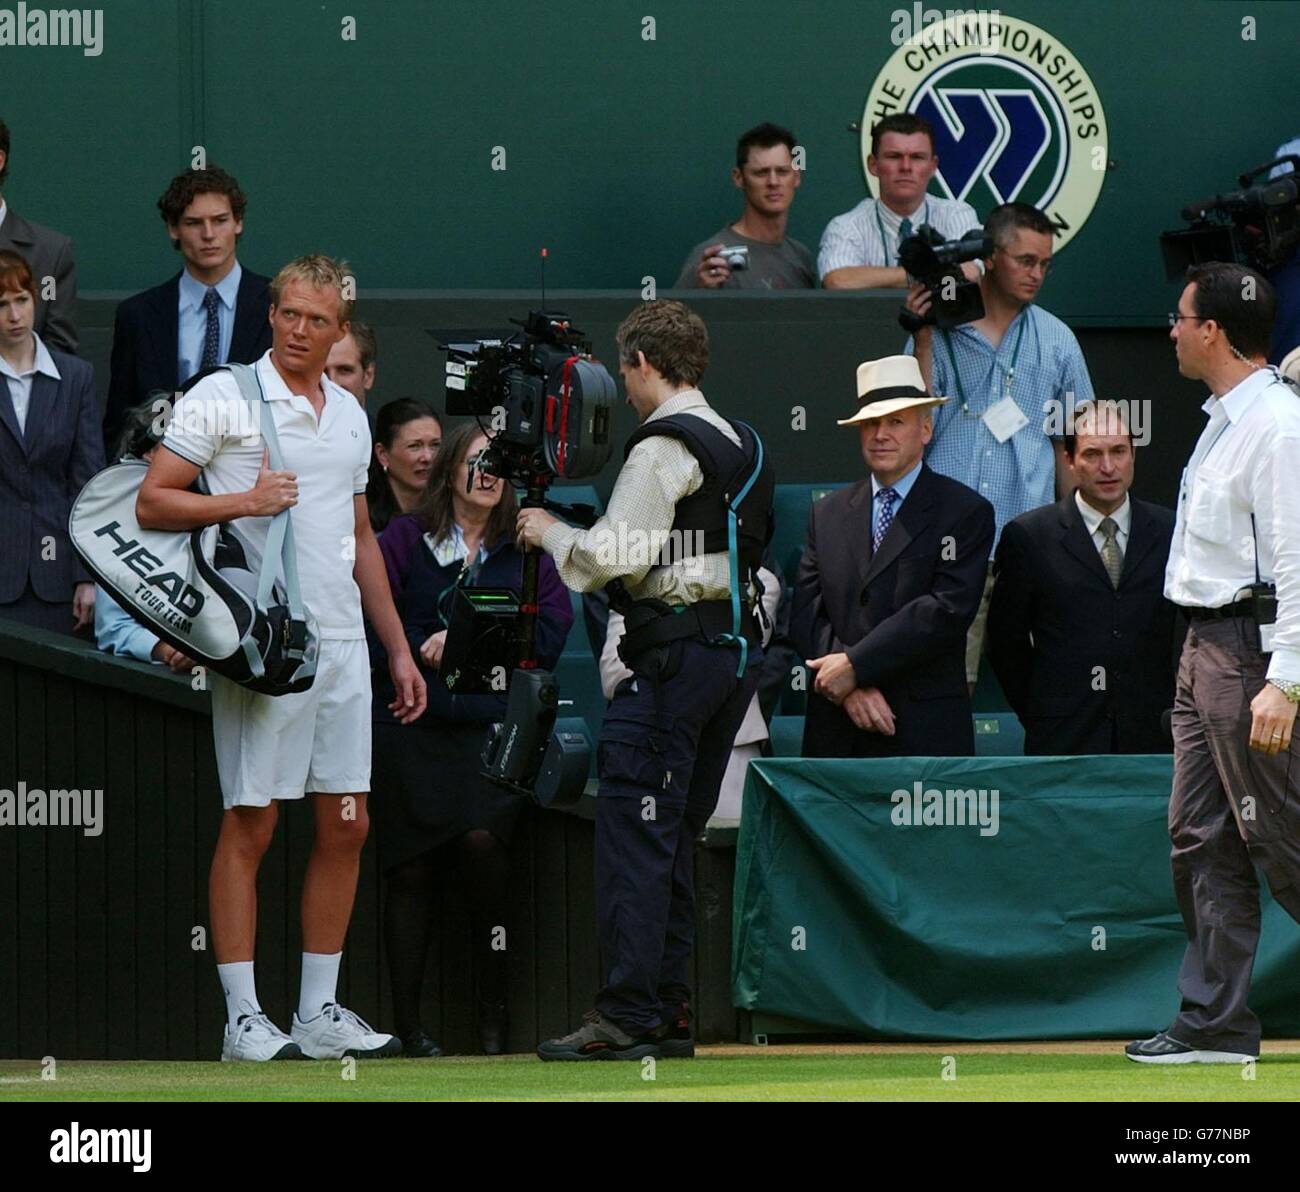 , NO MOBILE PHONE USE :British actor Paul Bettany walks onto Wimbledon's Centre Court at the All England Lawn Tennis Championships where he is starring in a movie about the world famous tournament along with Spiderman actress Kirsten Dunst. *..The actor also featured alongside Russell Crow in 'A Beautiful Mind'. Stock Photo